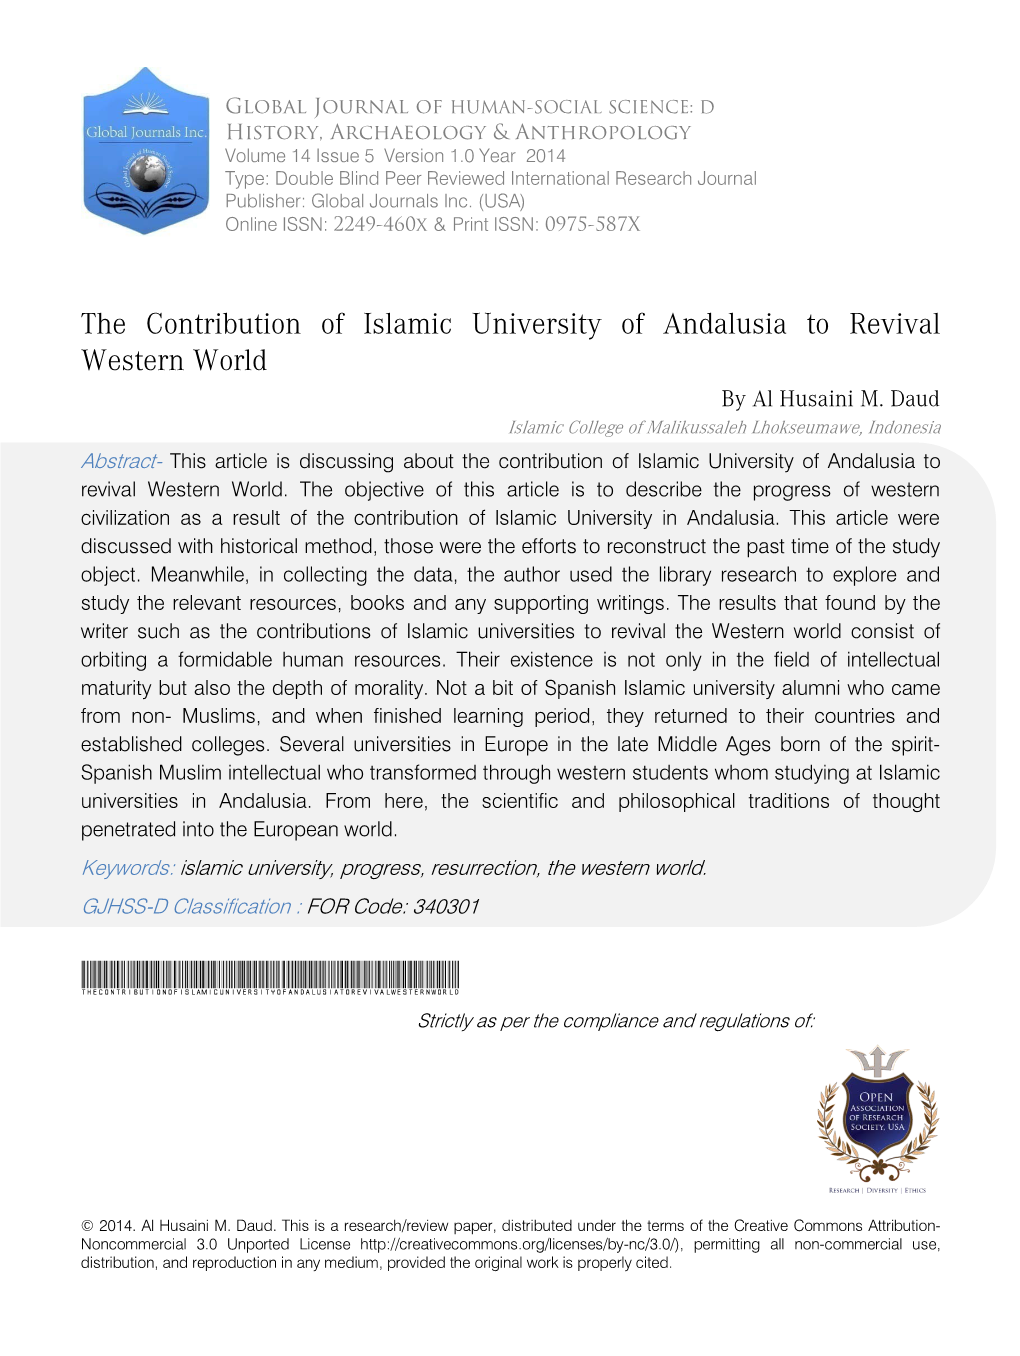 The Contribution of Islamic University of Andalusia to Revival Western World by Al Husaini M